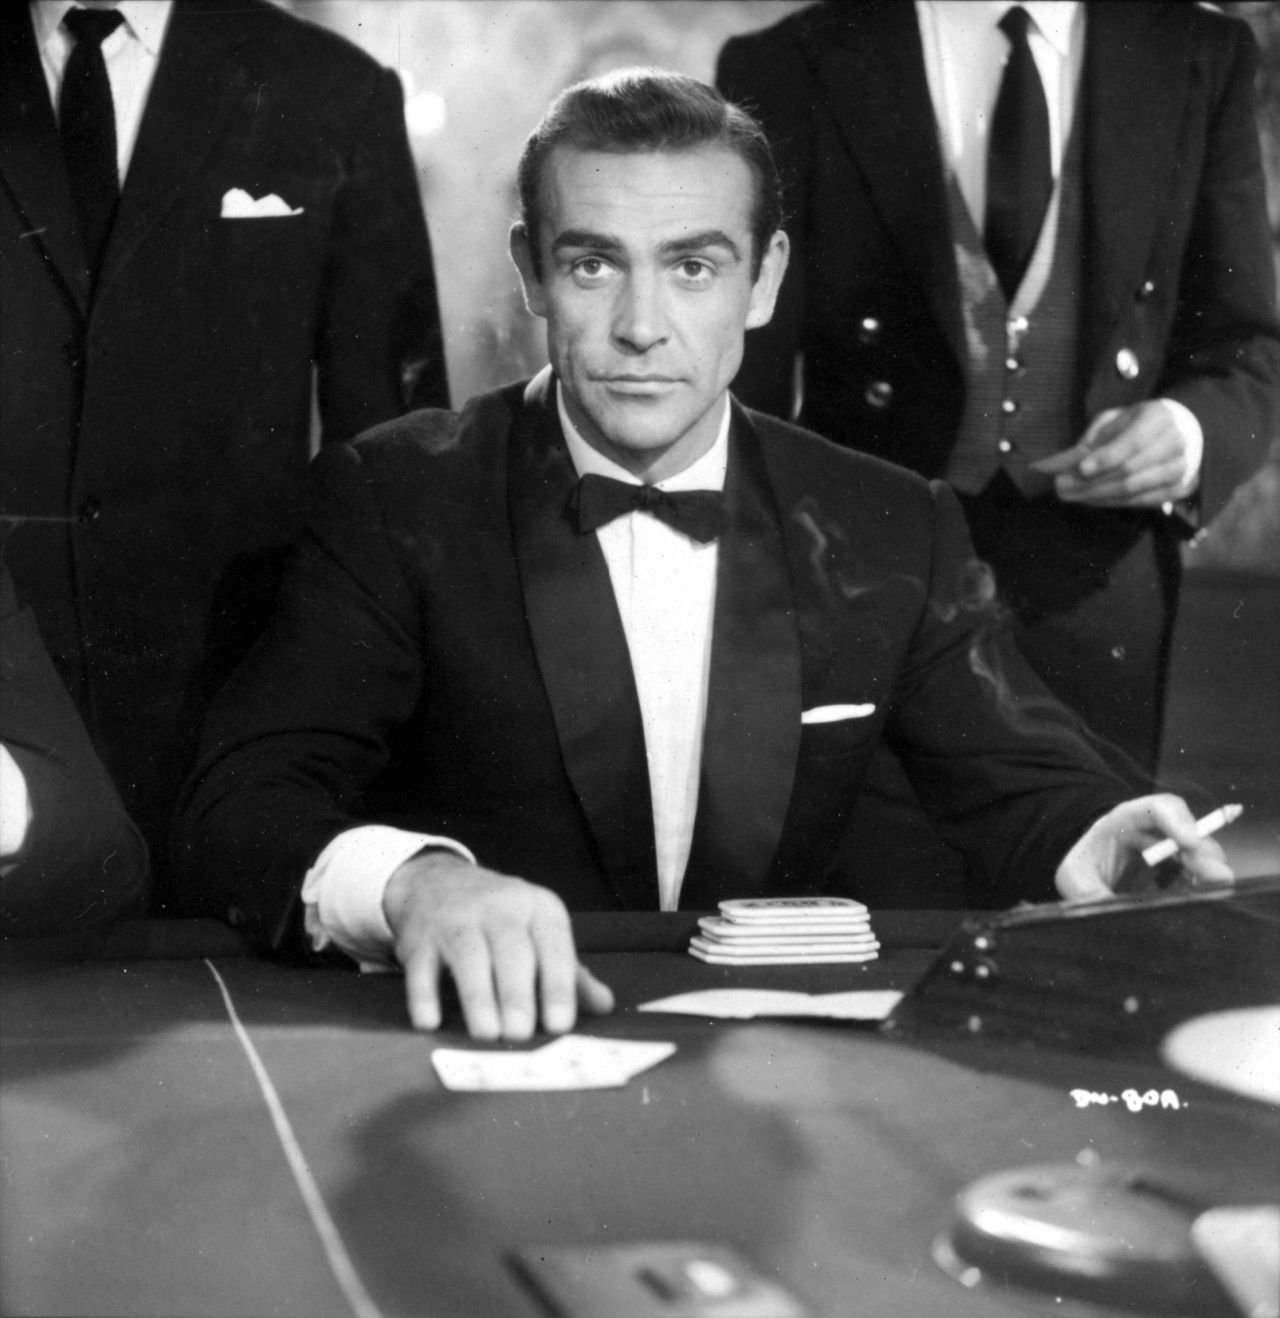 Scottish actor Sean Connery played James Bond in the first film "Dr. No" in 1962.